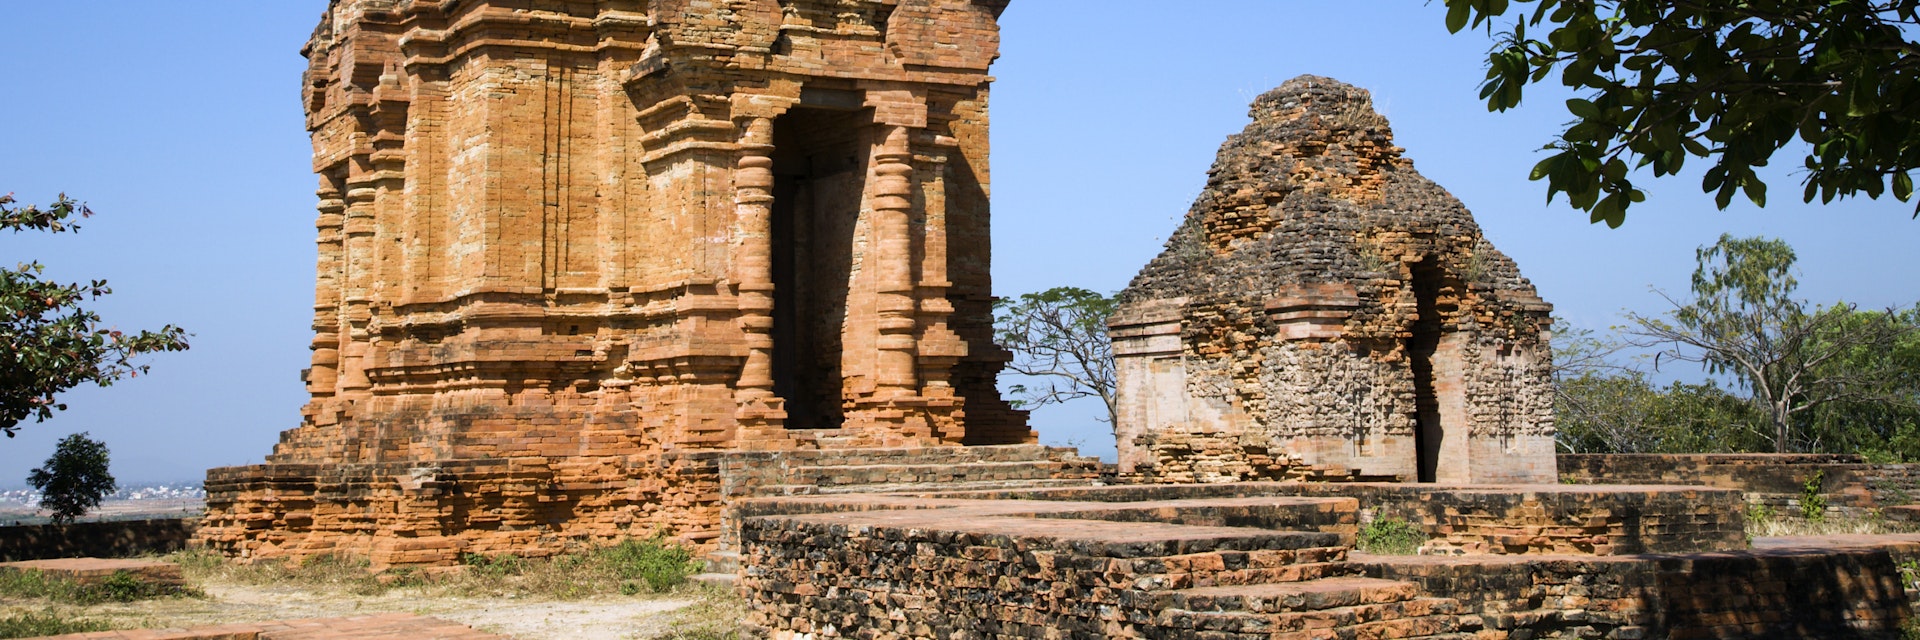 Po Shanu Cham Towers on hill north of Phan Thiet town.